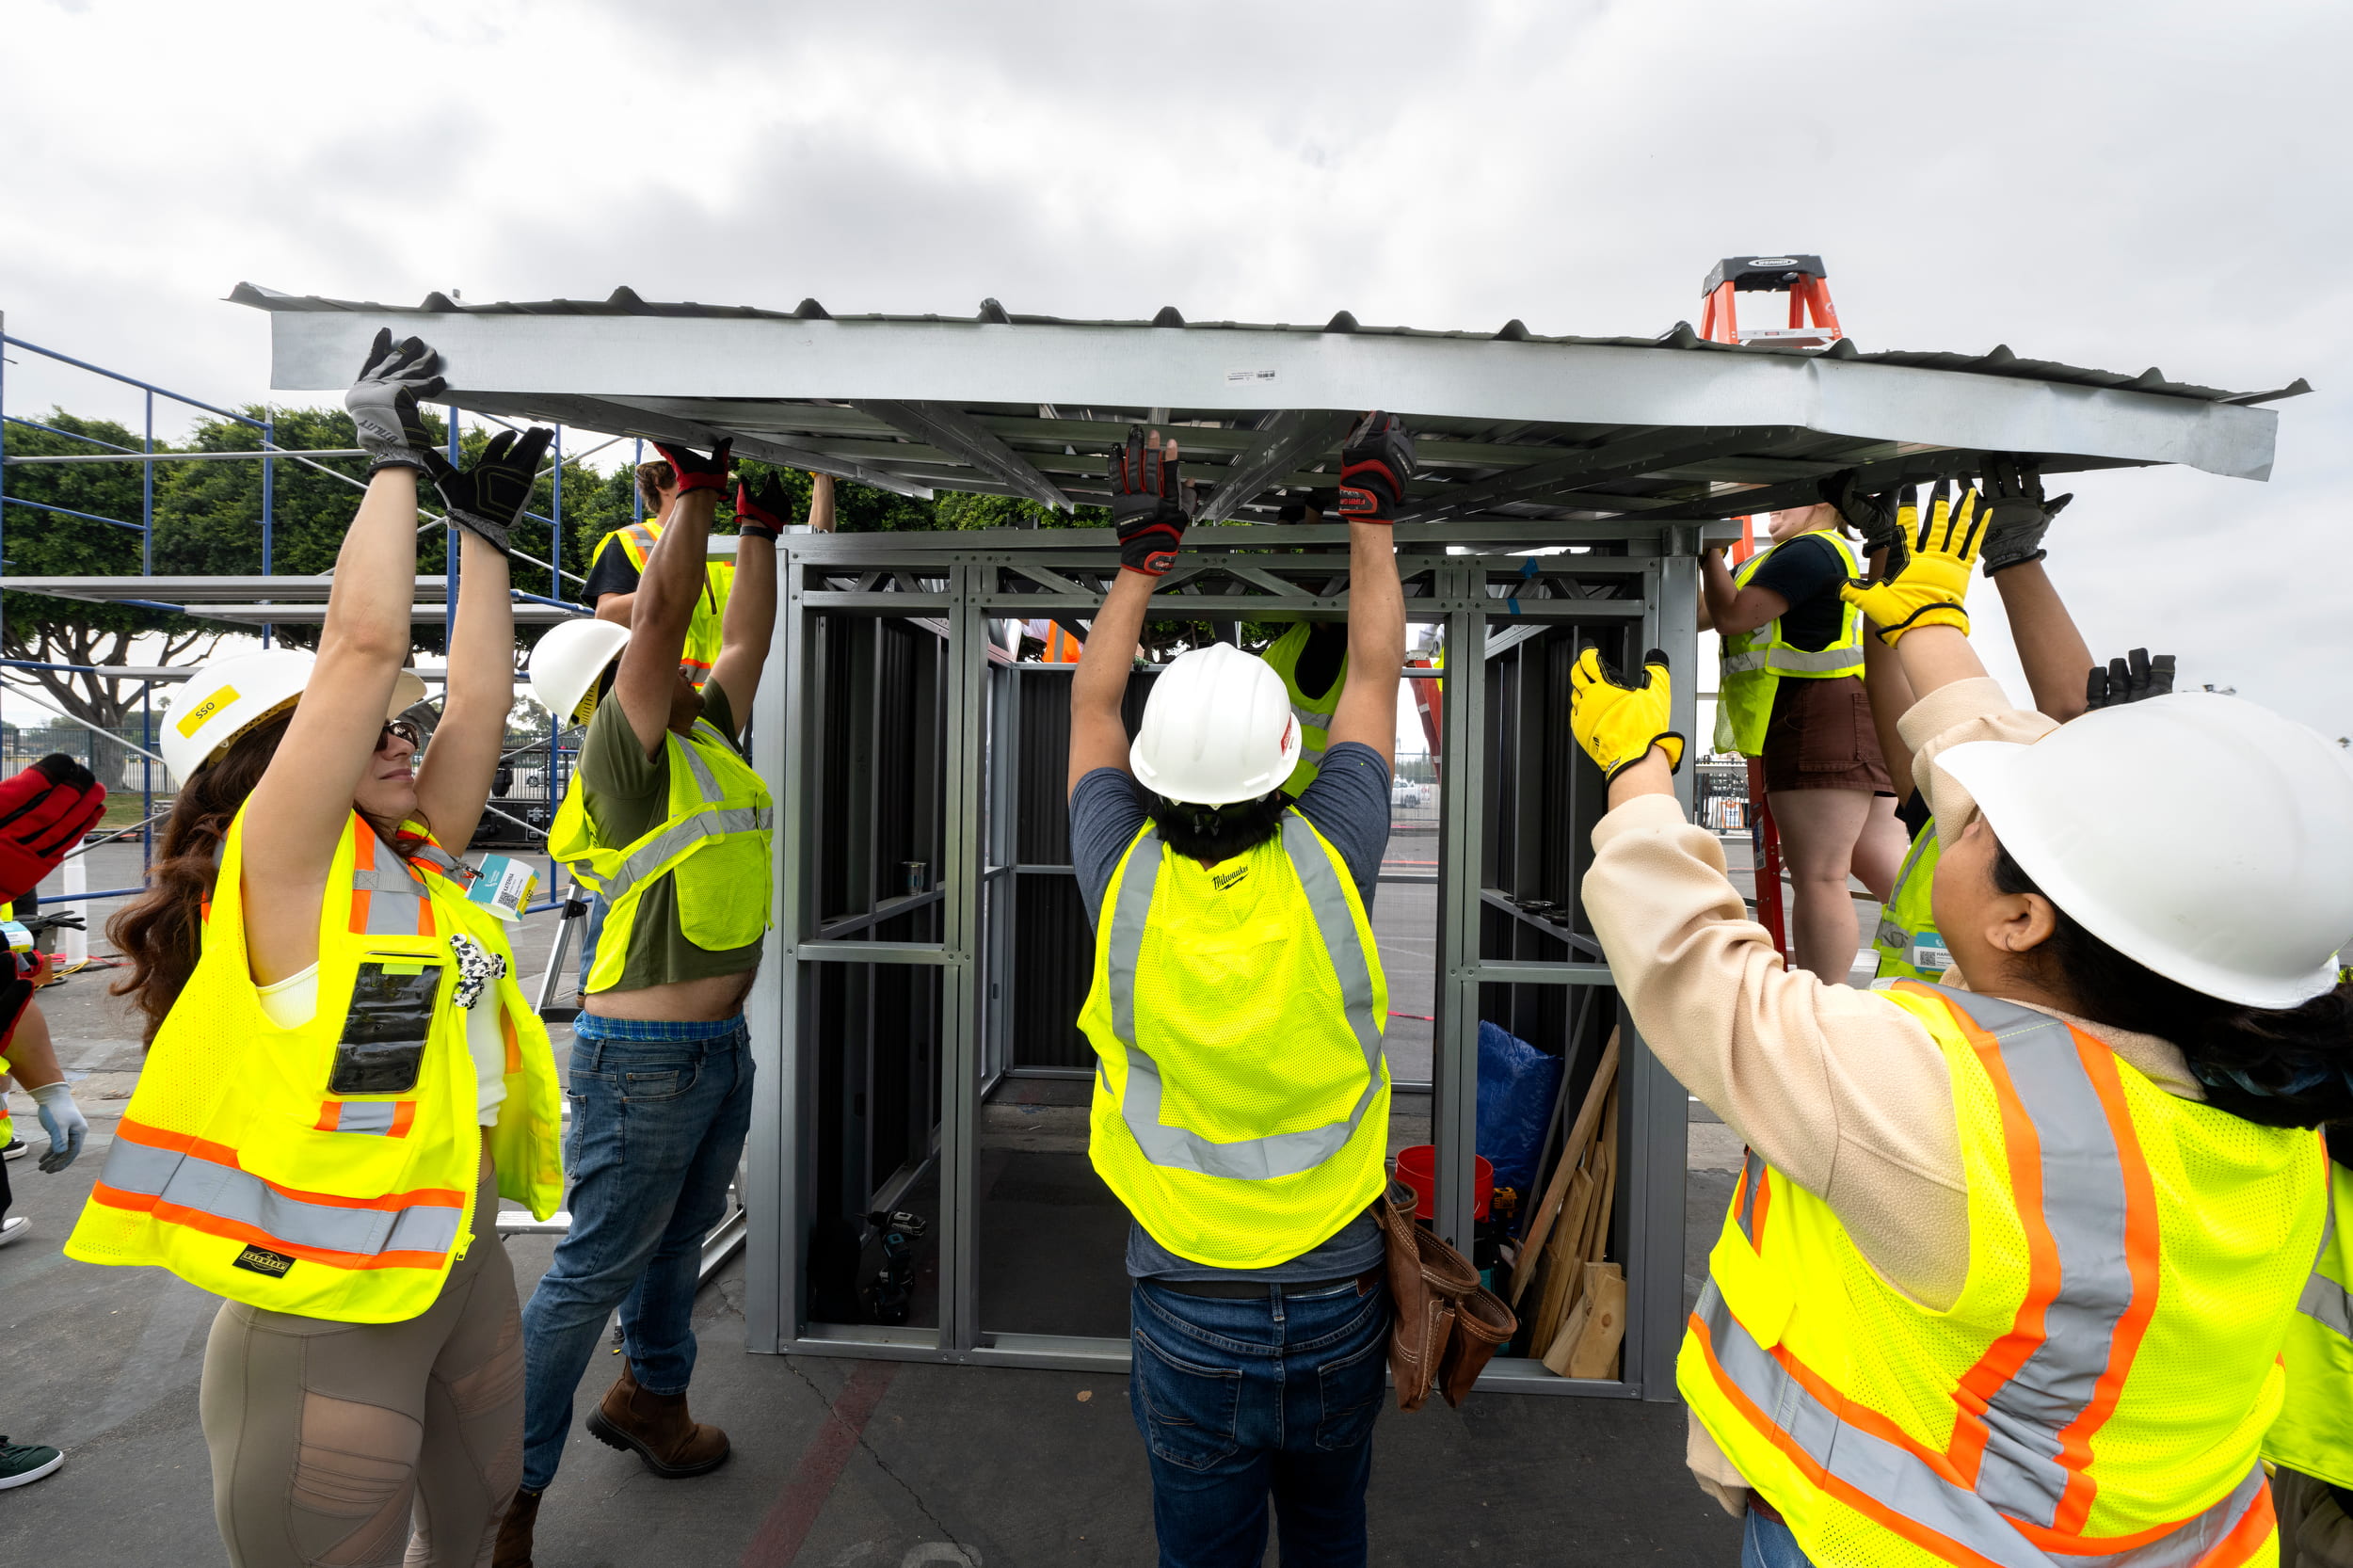 Workers in hard hats and yellow vests work together to place a roof frame on top of a structure.